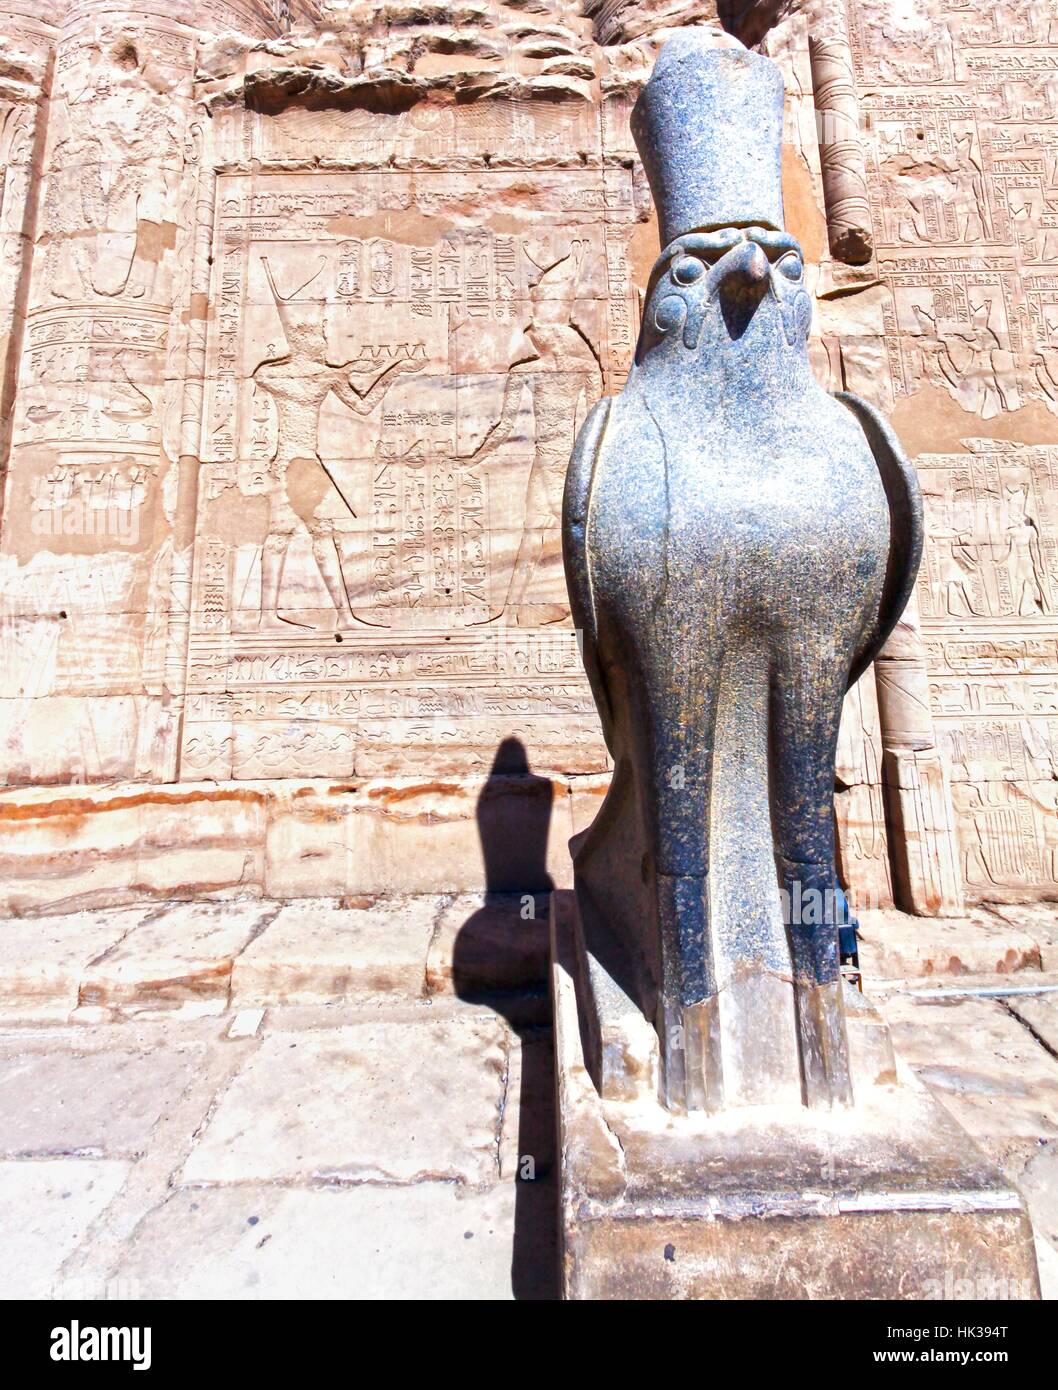 Ancient Egyptian Civilization Statue of God Horus Standing in Courtyard of Temple of Philae between Aswan and Luxor, Egypt Stock Photo